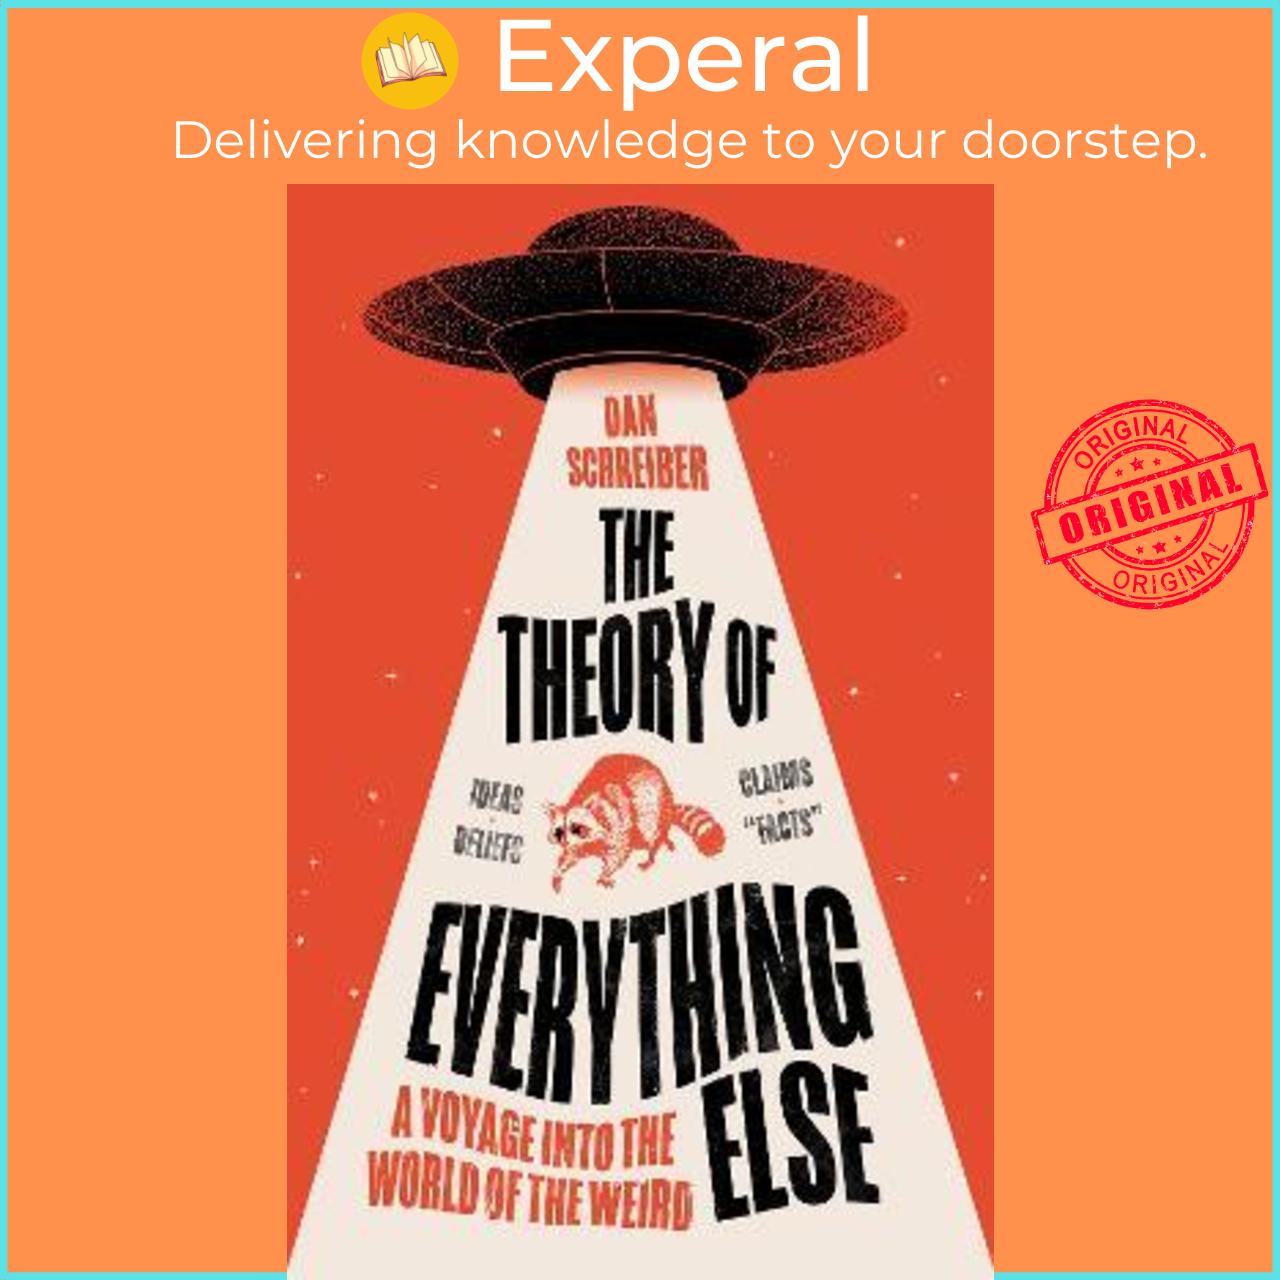 Sách - The Theory of Everything Else by Dan Schreiber (UK edition, hardcover)